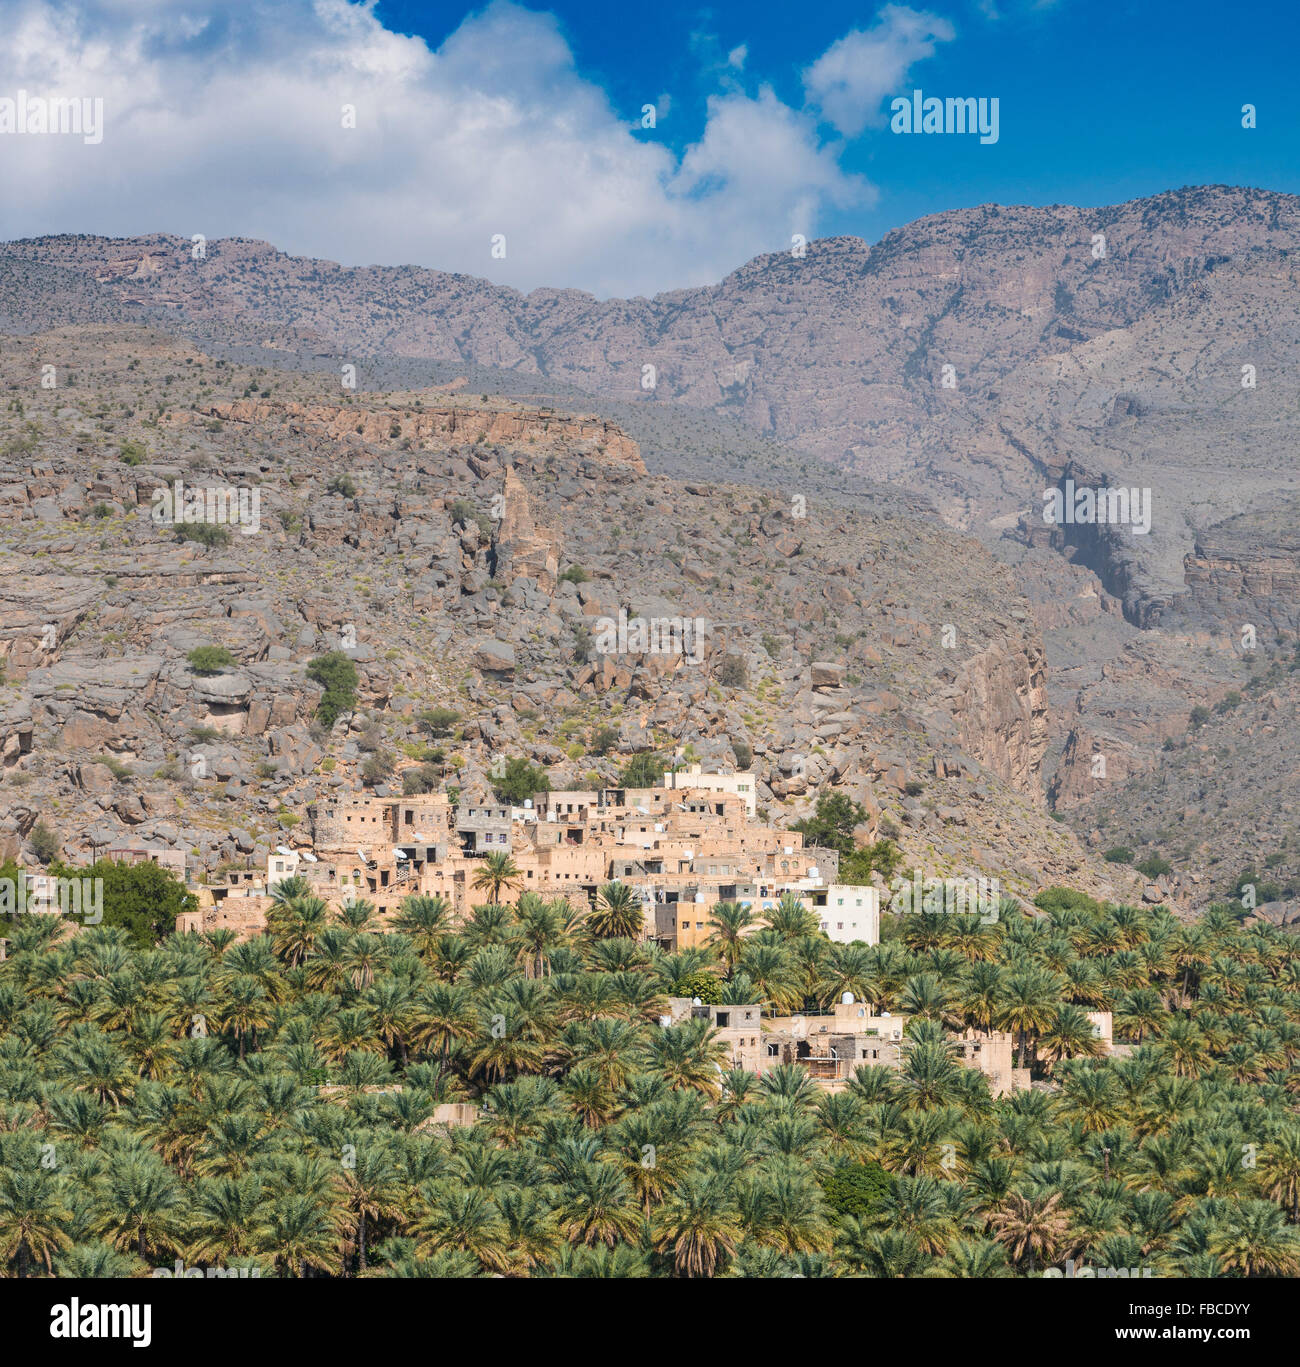 View of traditional old village at Misfat al Abryeen in Oman Stock Photo